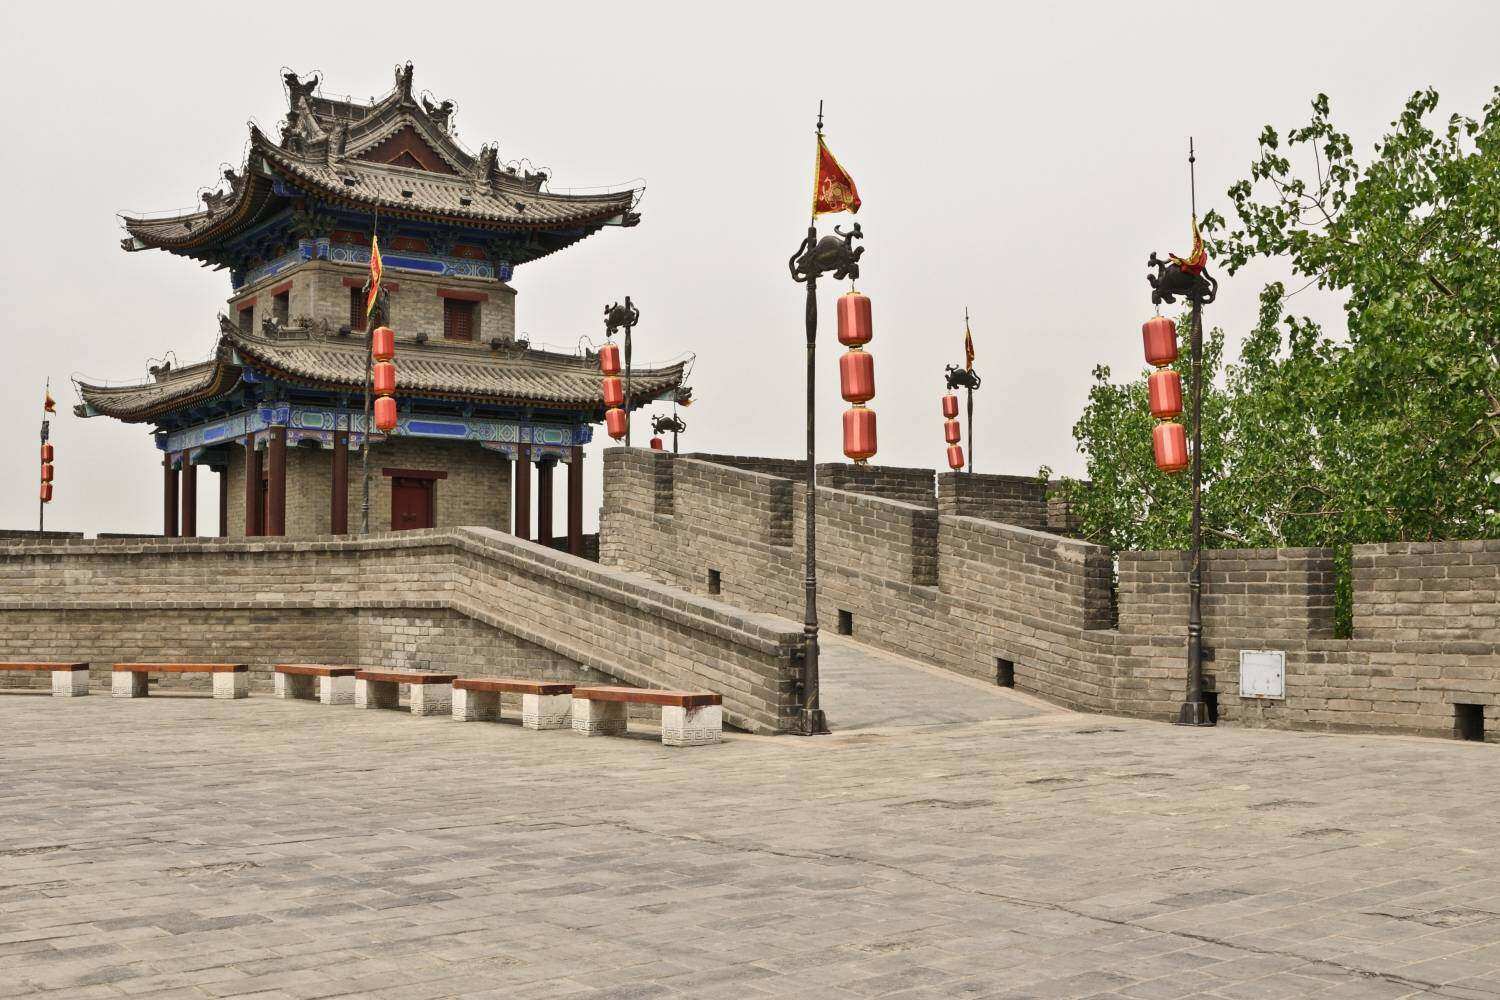 The city wall in Xi'an, China